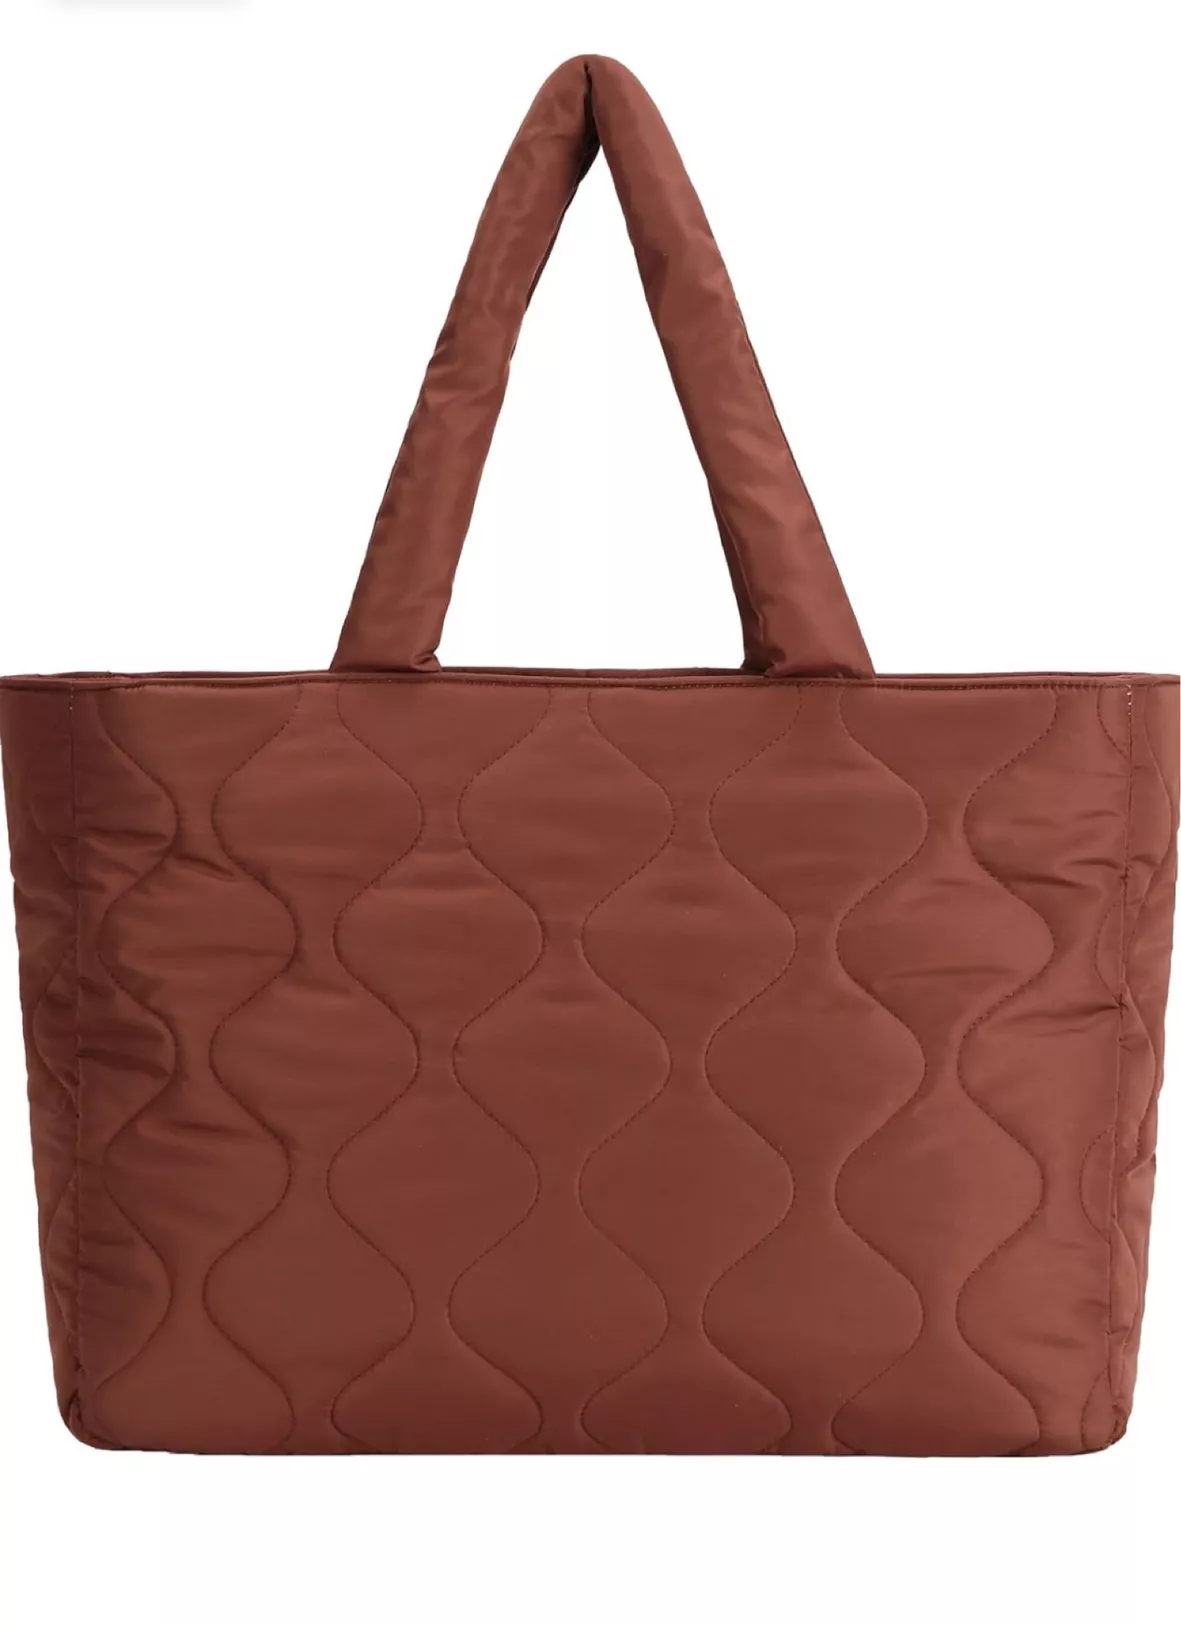 Large Tote Bag For Women, Luxury Padded Purses And Handbags